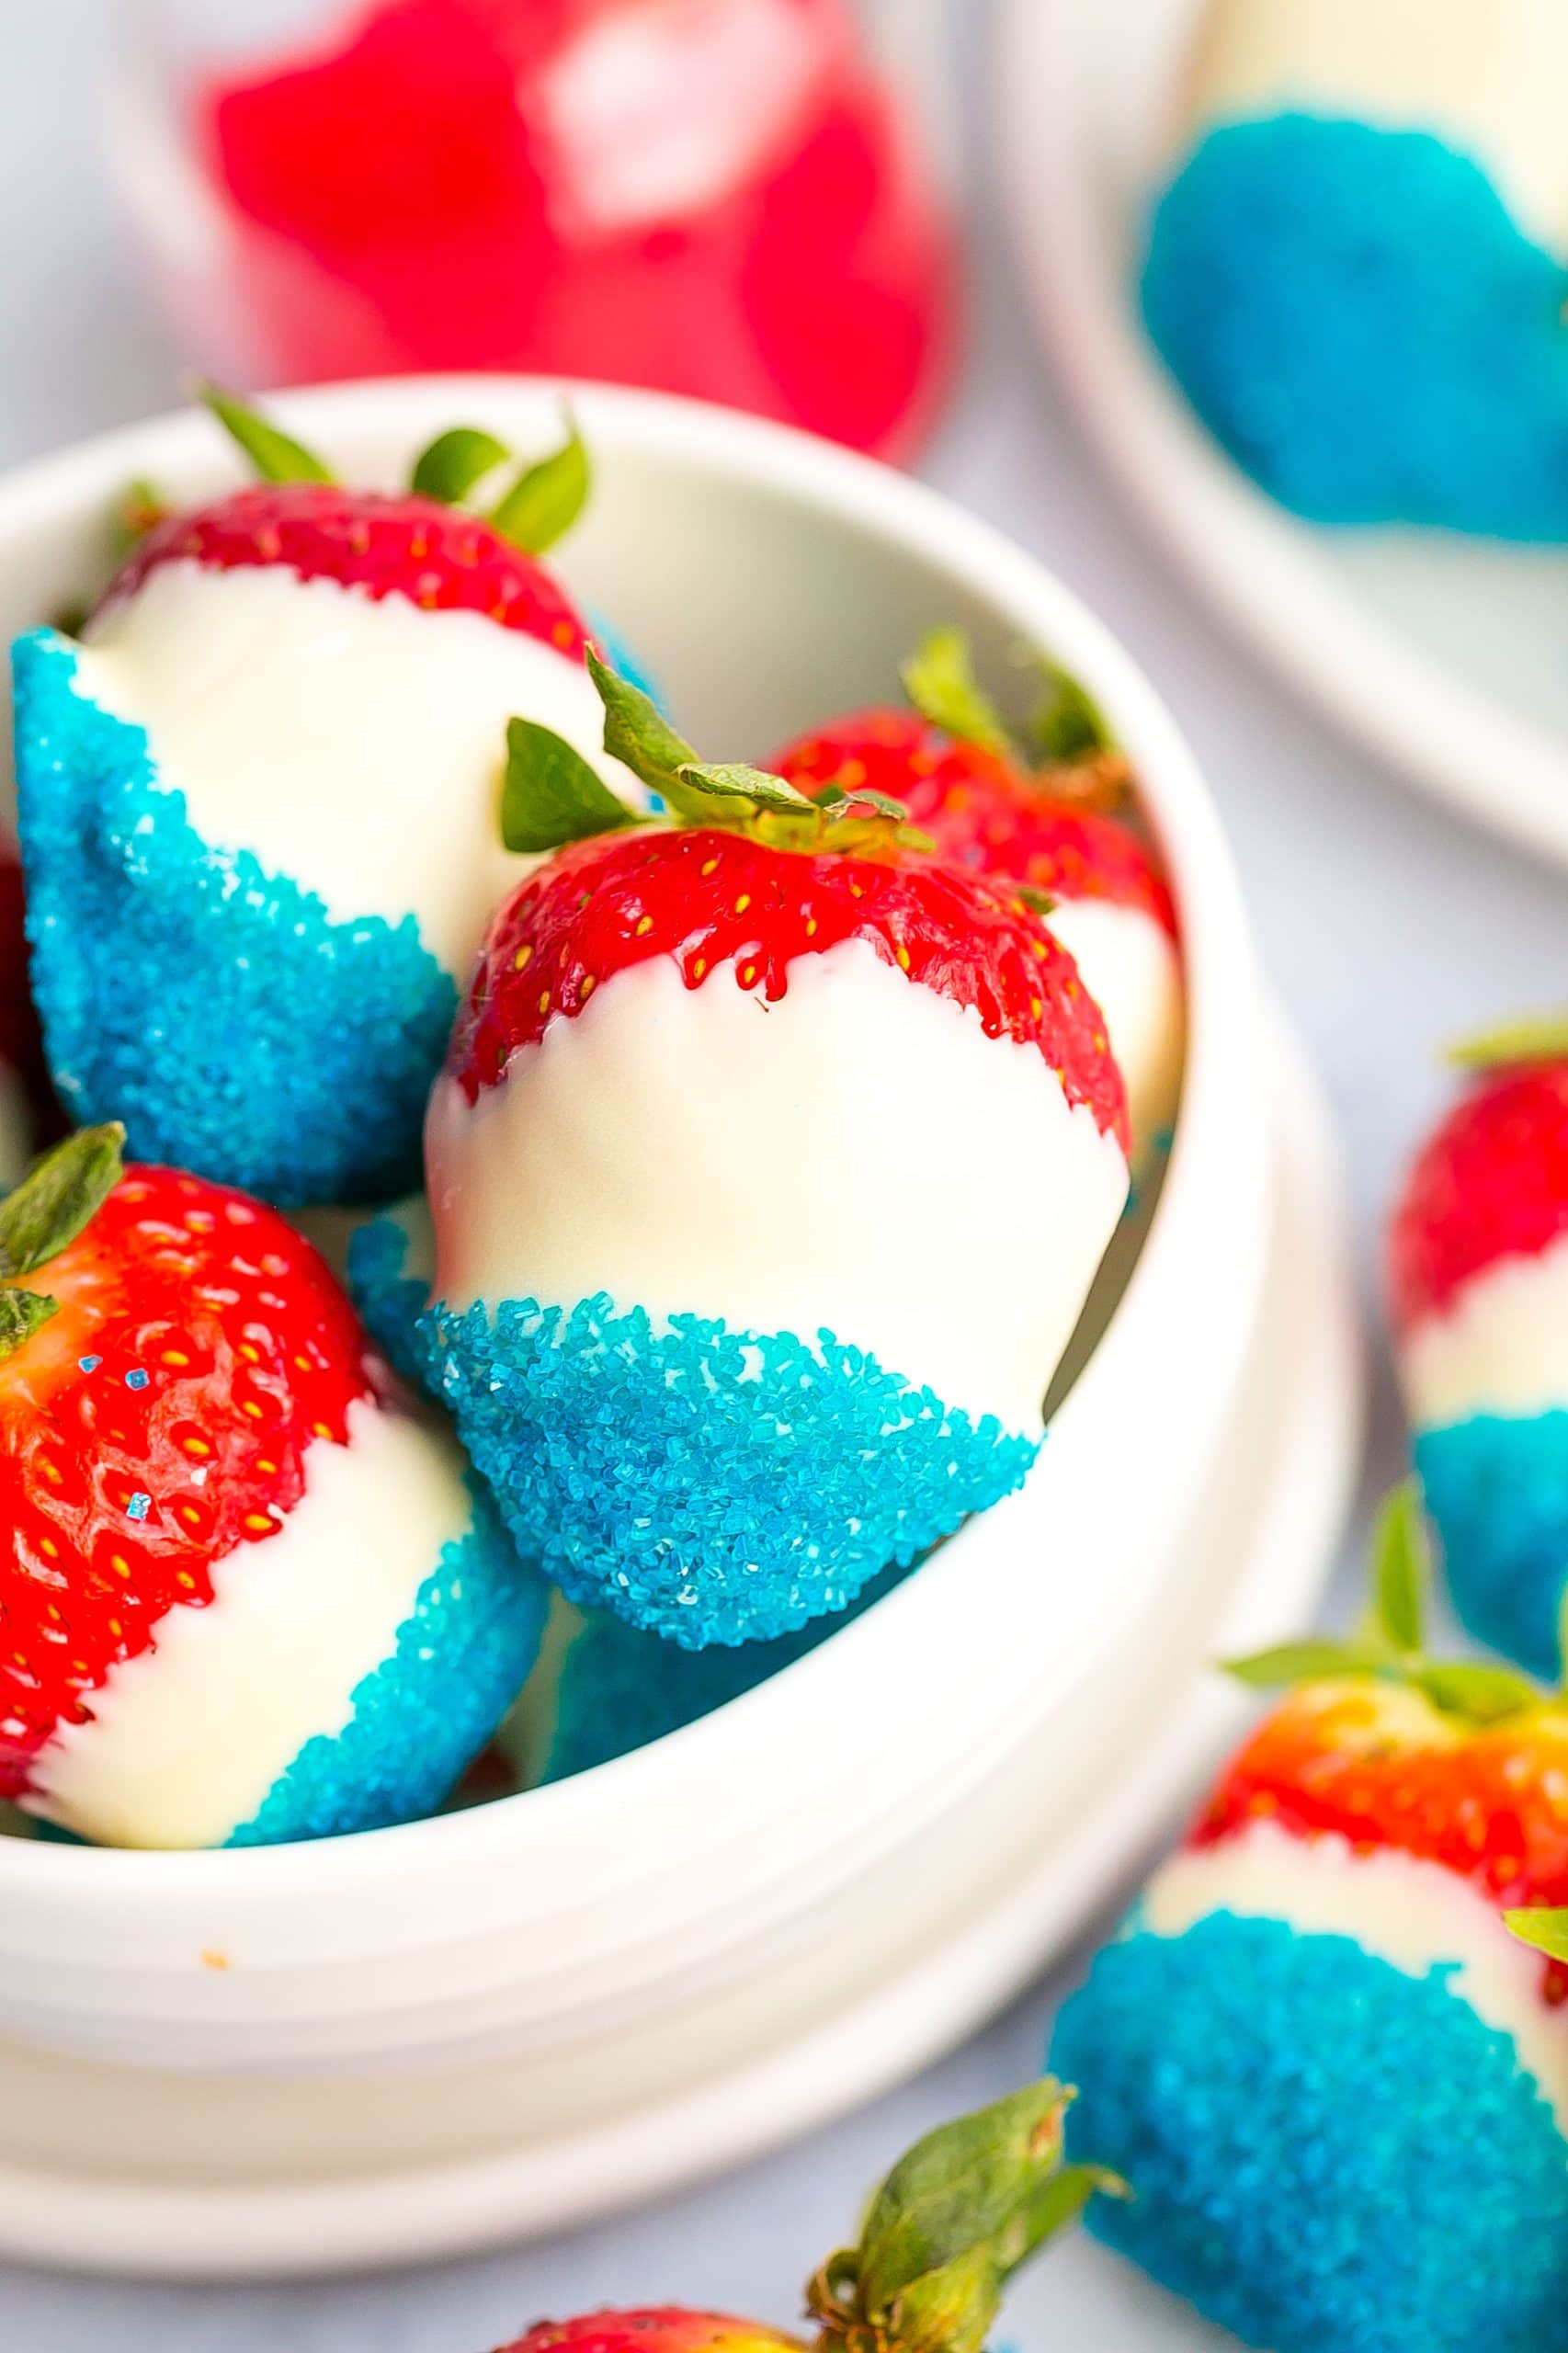 Close up view of Red, White, and Blue Strawberries.
